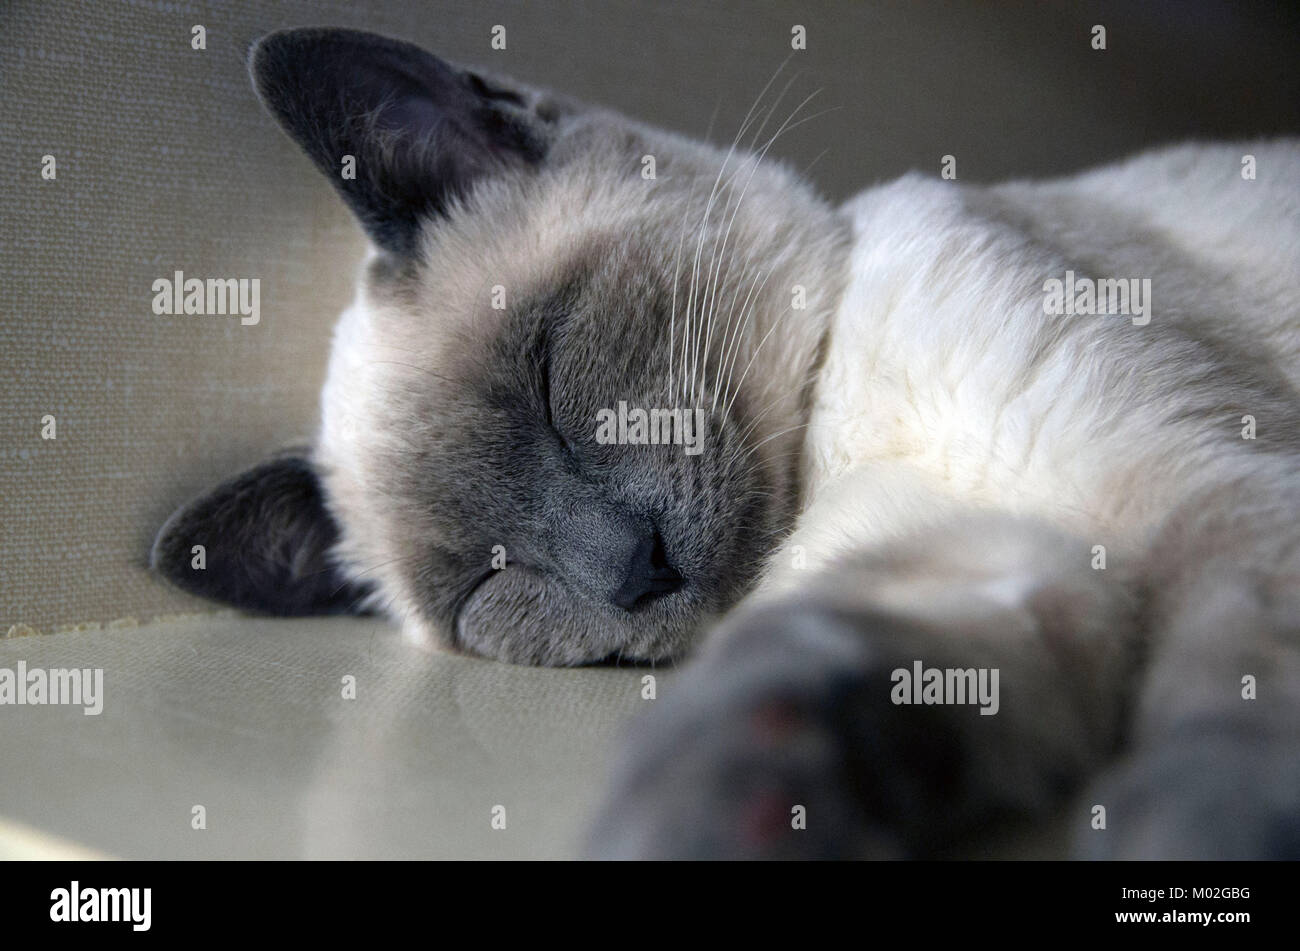 A siamese kitten snoozes in the adoption part of the animal shelter. Stock Photo